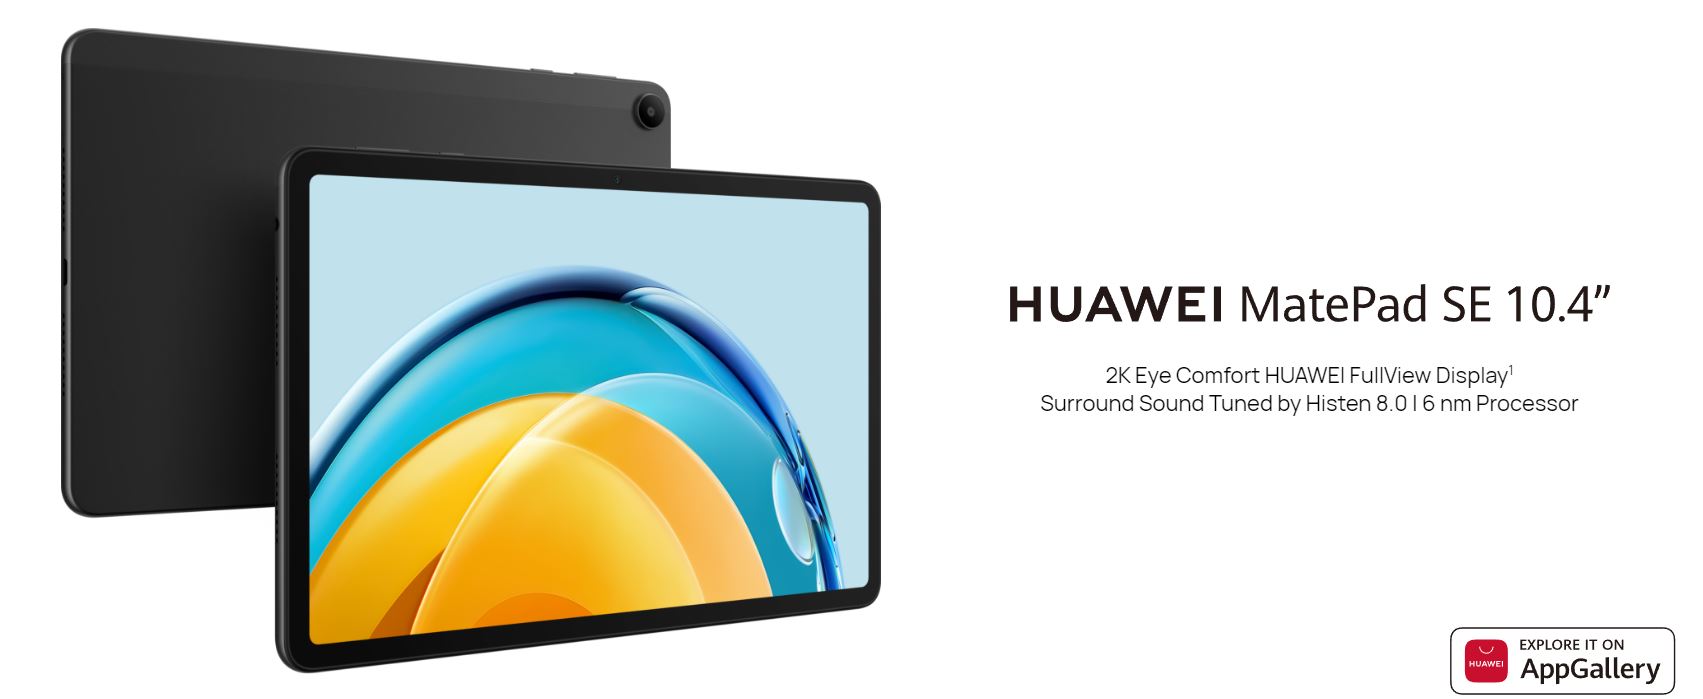 128GB and with Huawei Matepad SE RAM 4GB of Storage LTE 10.4-inch